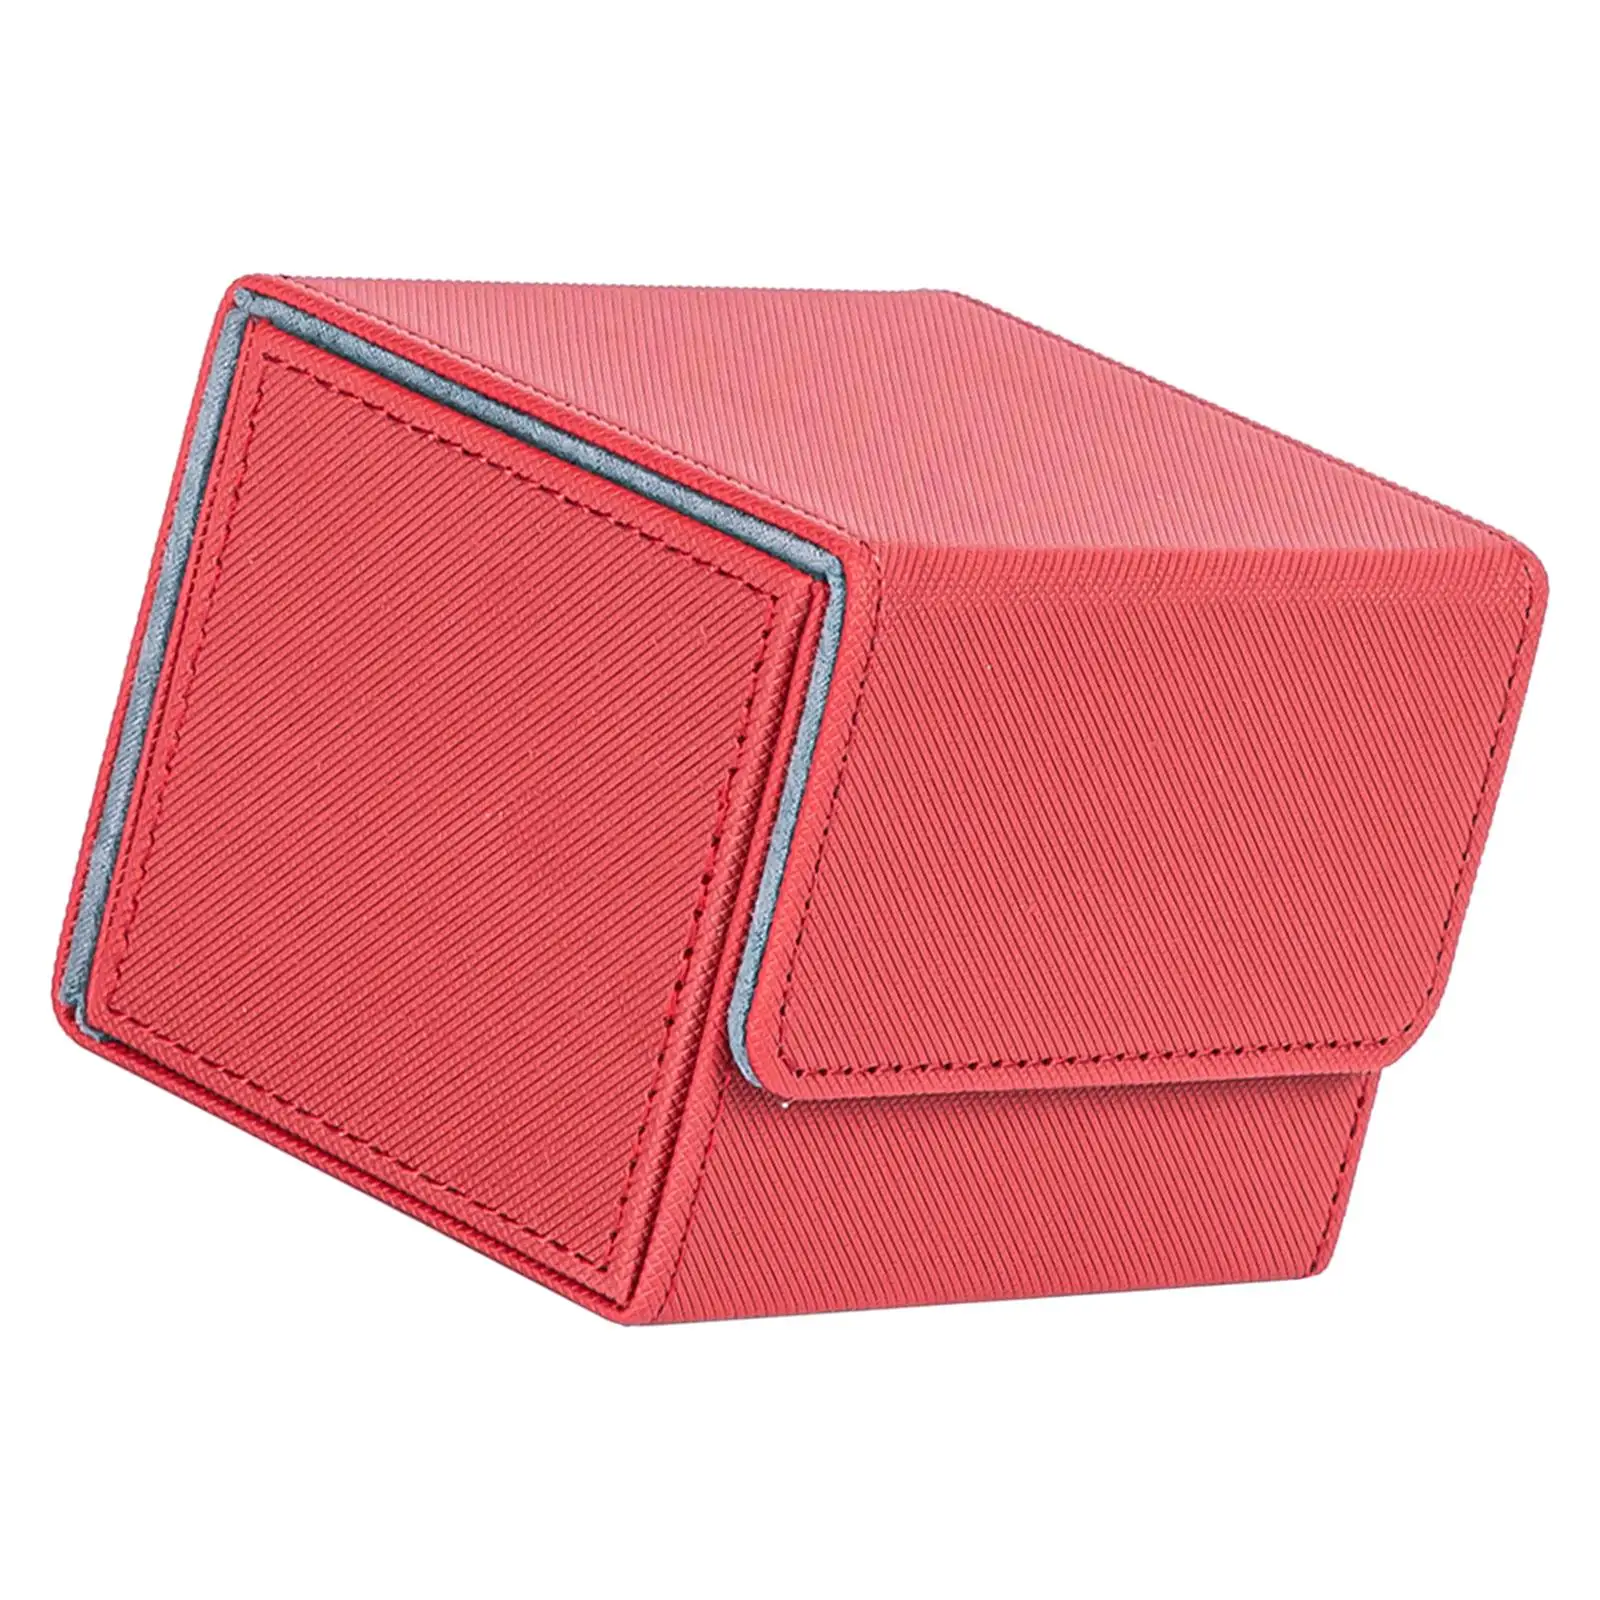 Trading Card Deck Box Card Game Protector for MTG Cards Basketball Card